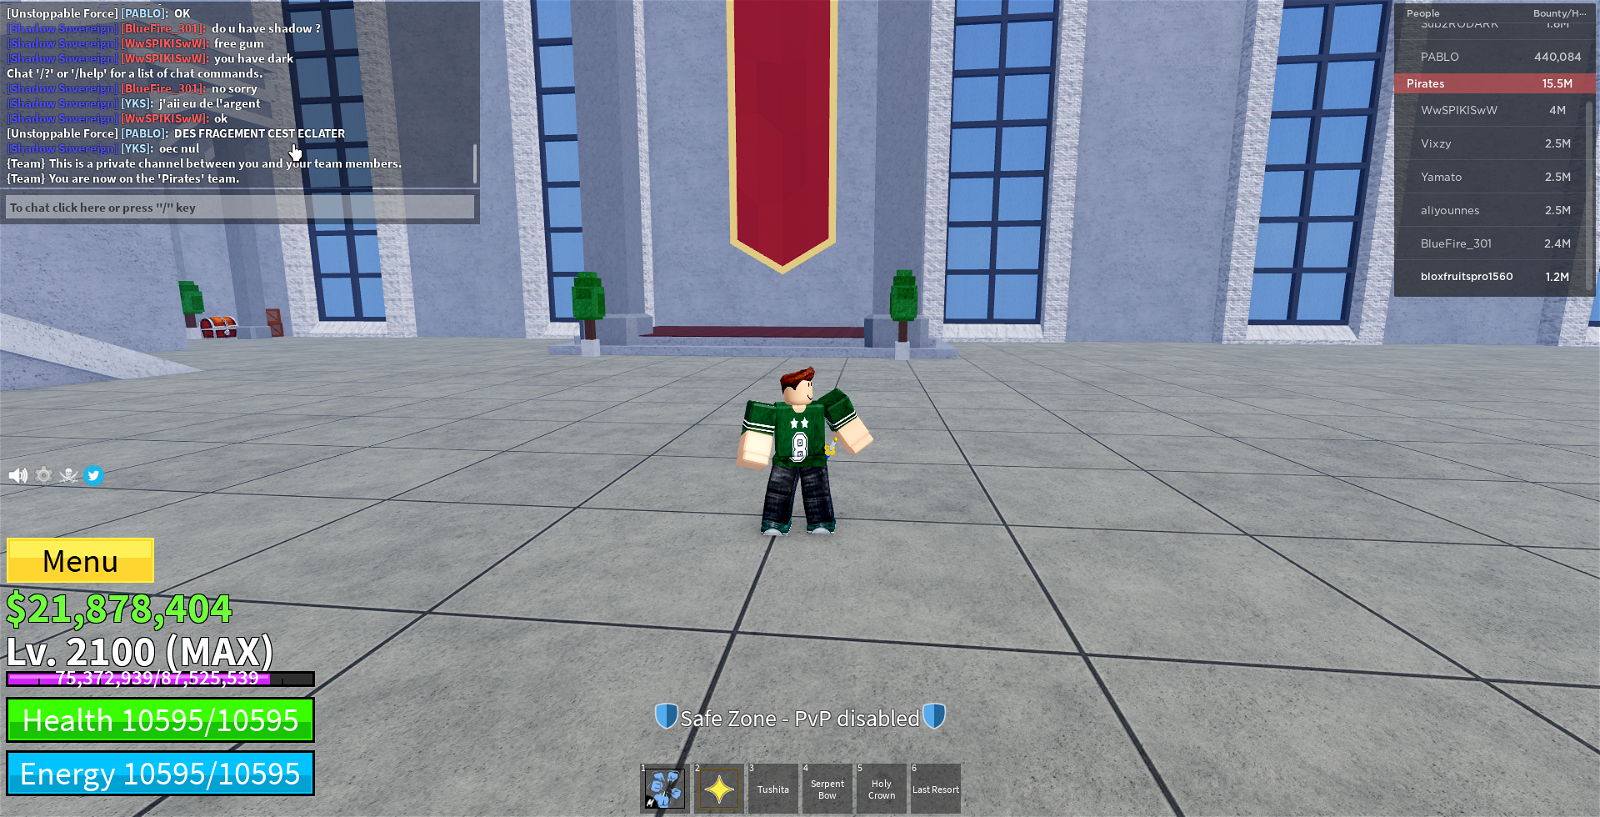 SOLD - Selling maxed out Blox Fruits account (lvl 2100) - EpicNPC